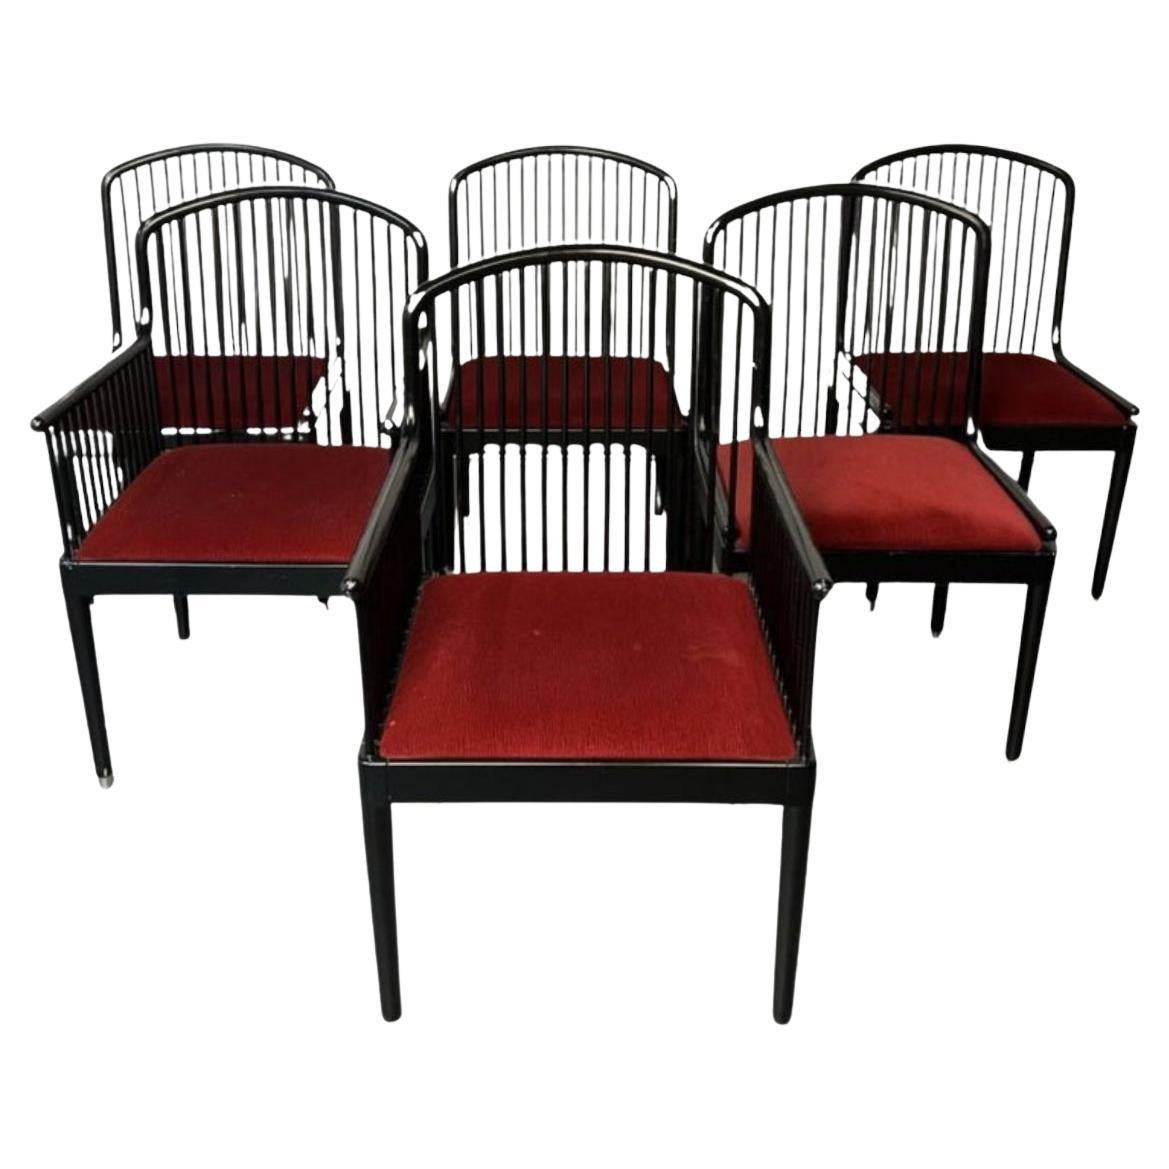 Set of 6 Andover Black Lacquer Dining Chairs by Davis Allen for Stendig